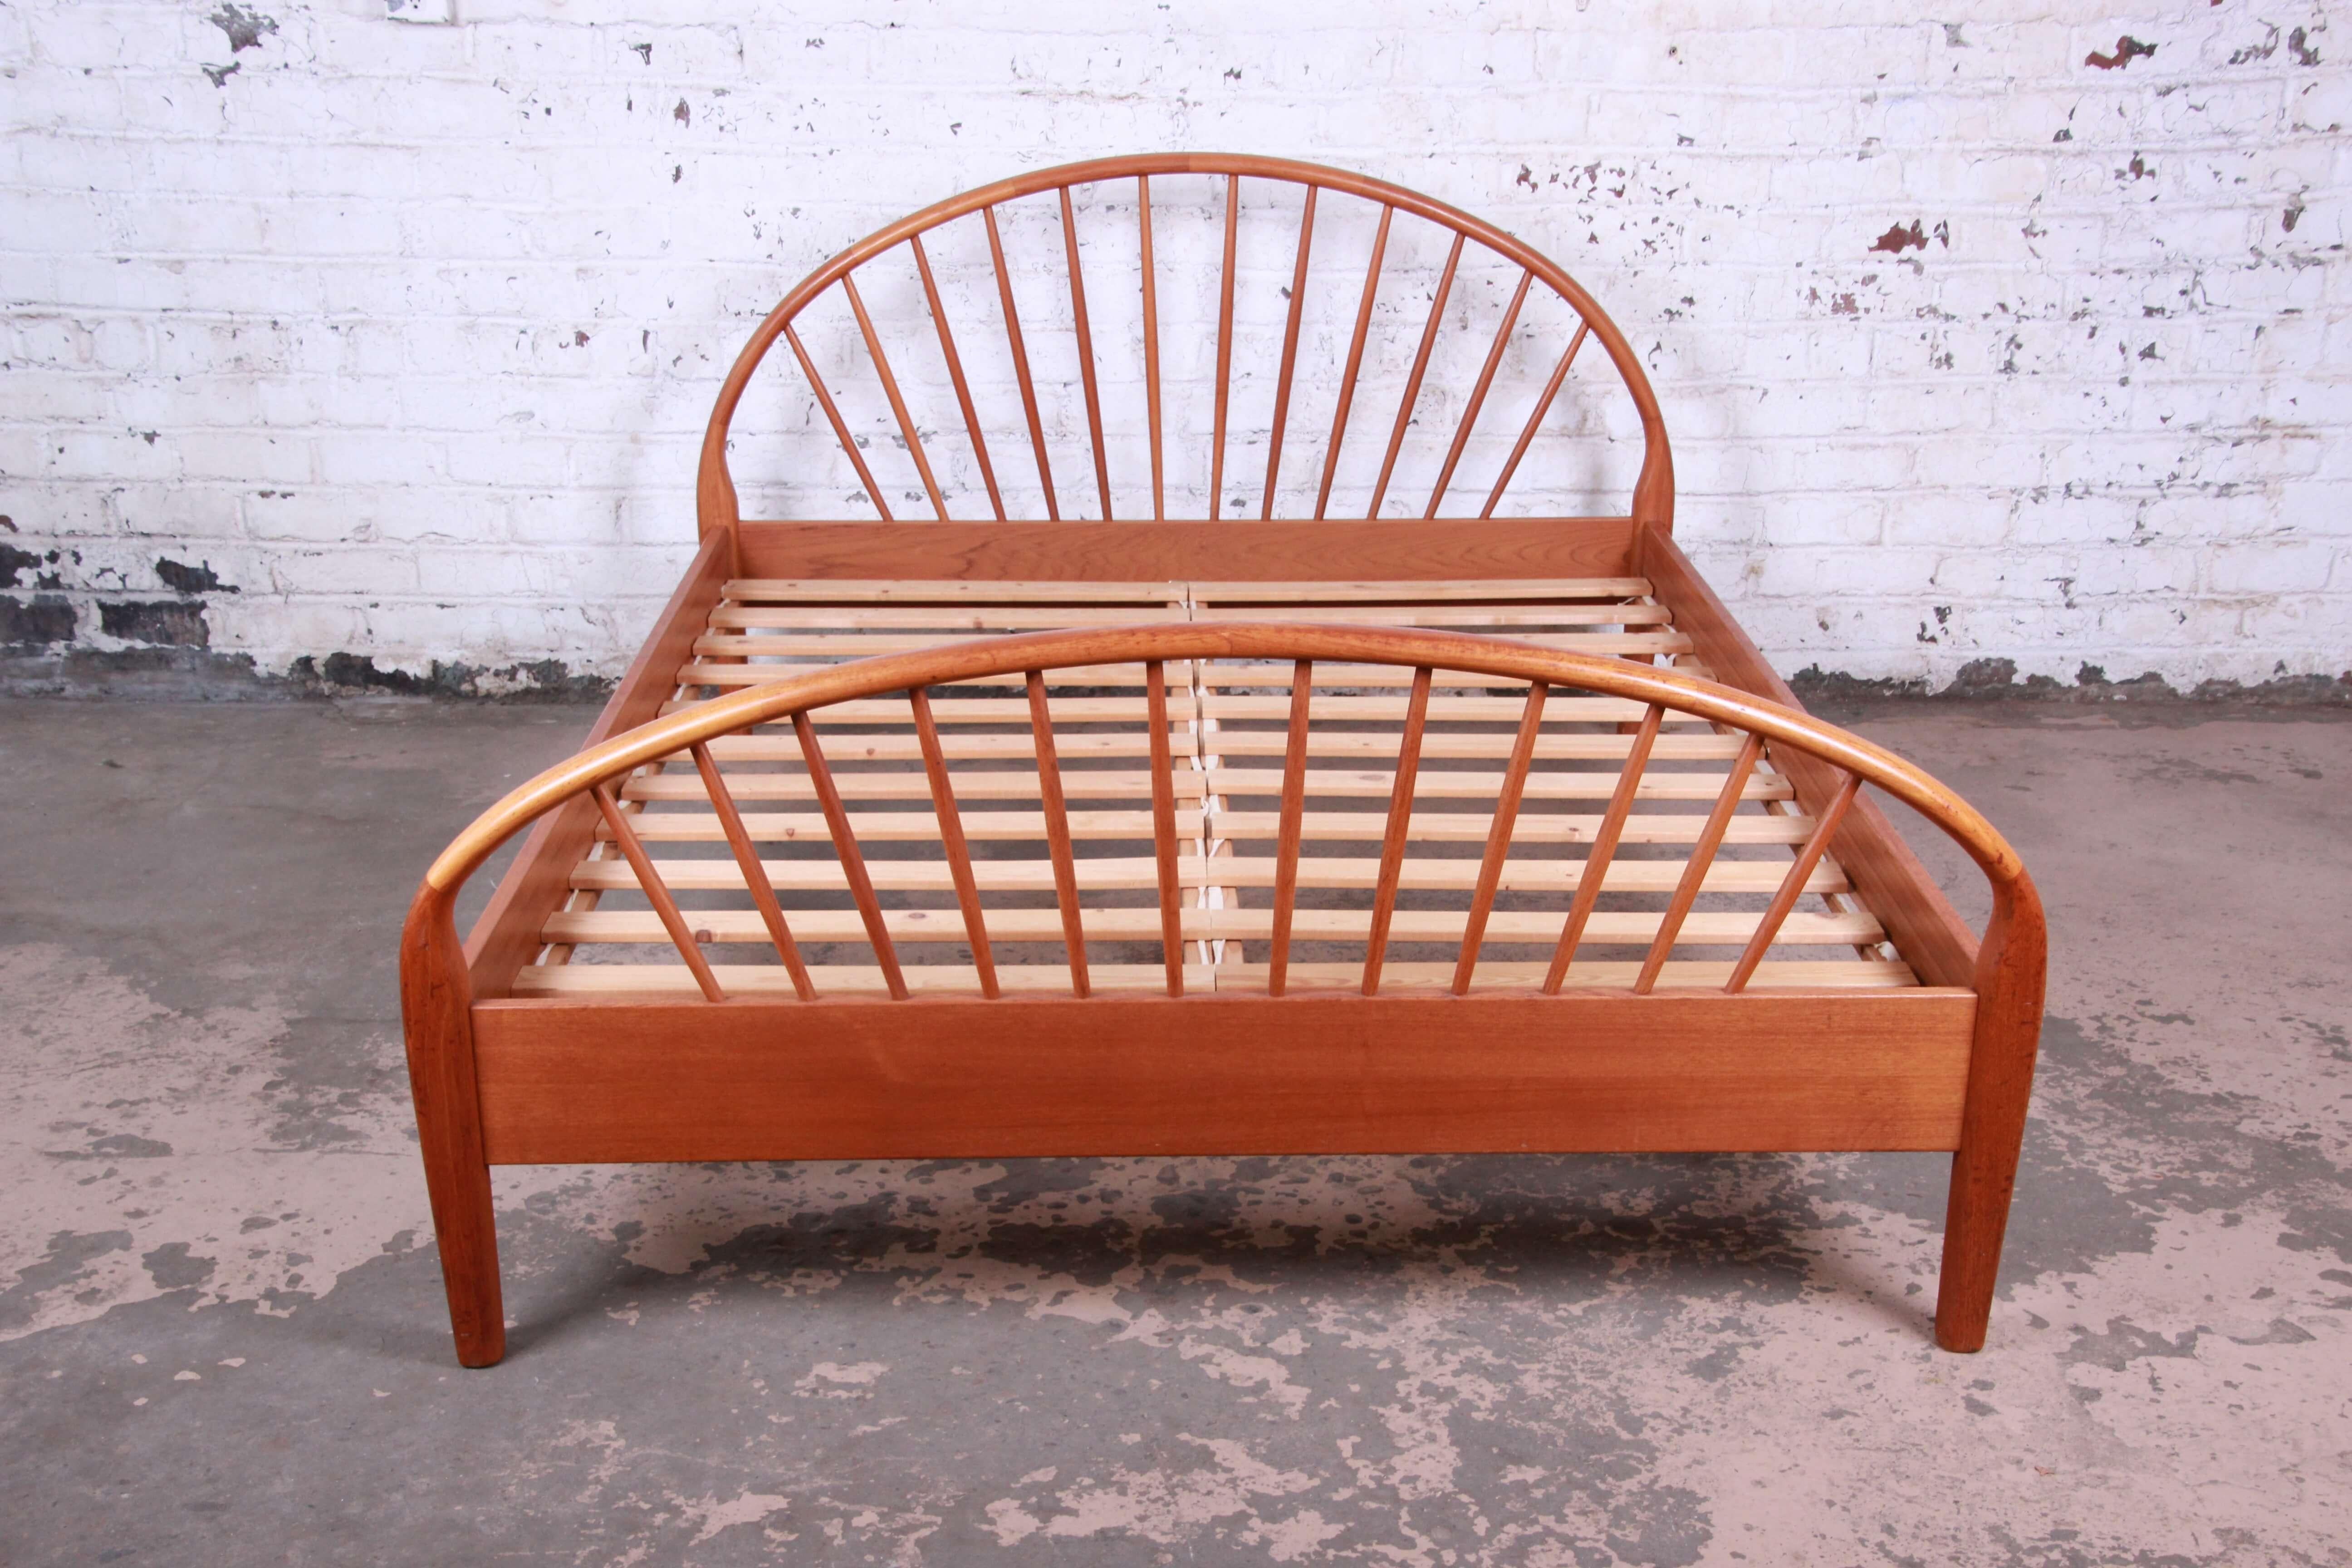 Offering a very nice and unique vintage queen size Danish Modern teak bed by Jesper. The bed has a nice solid teak wood frame with curved headboard and footboard with spindle design. The bed comes with all original hardware and slats. It is made by